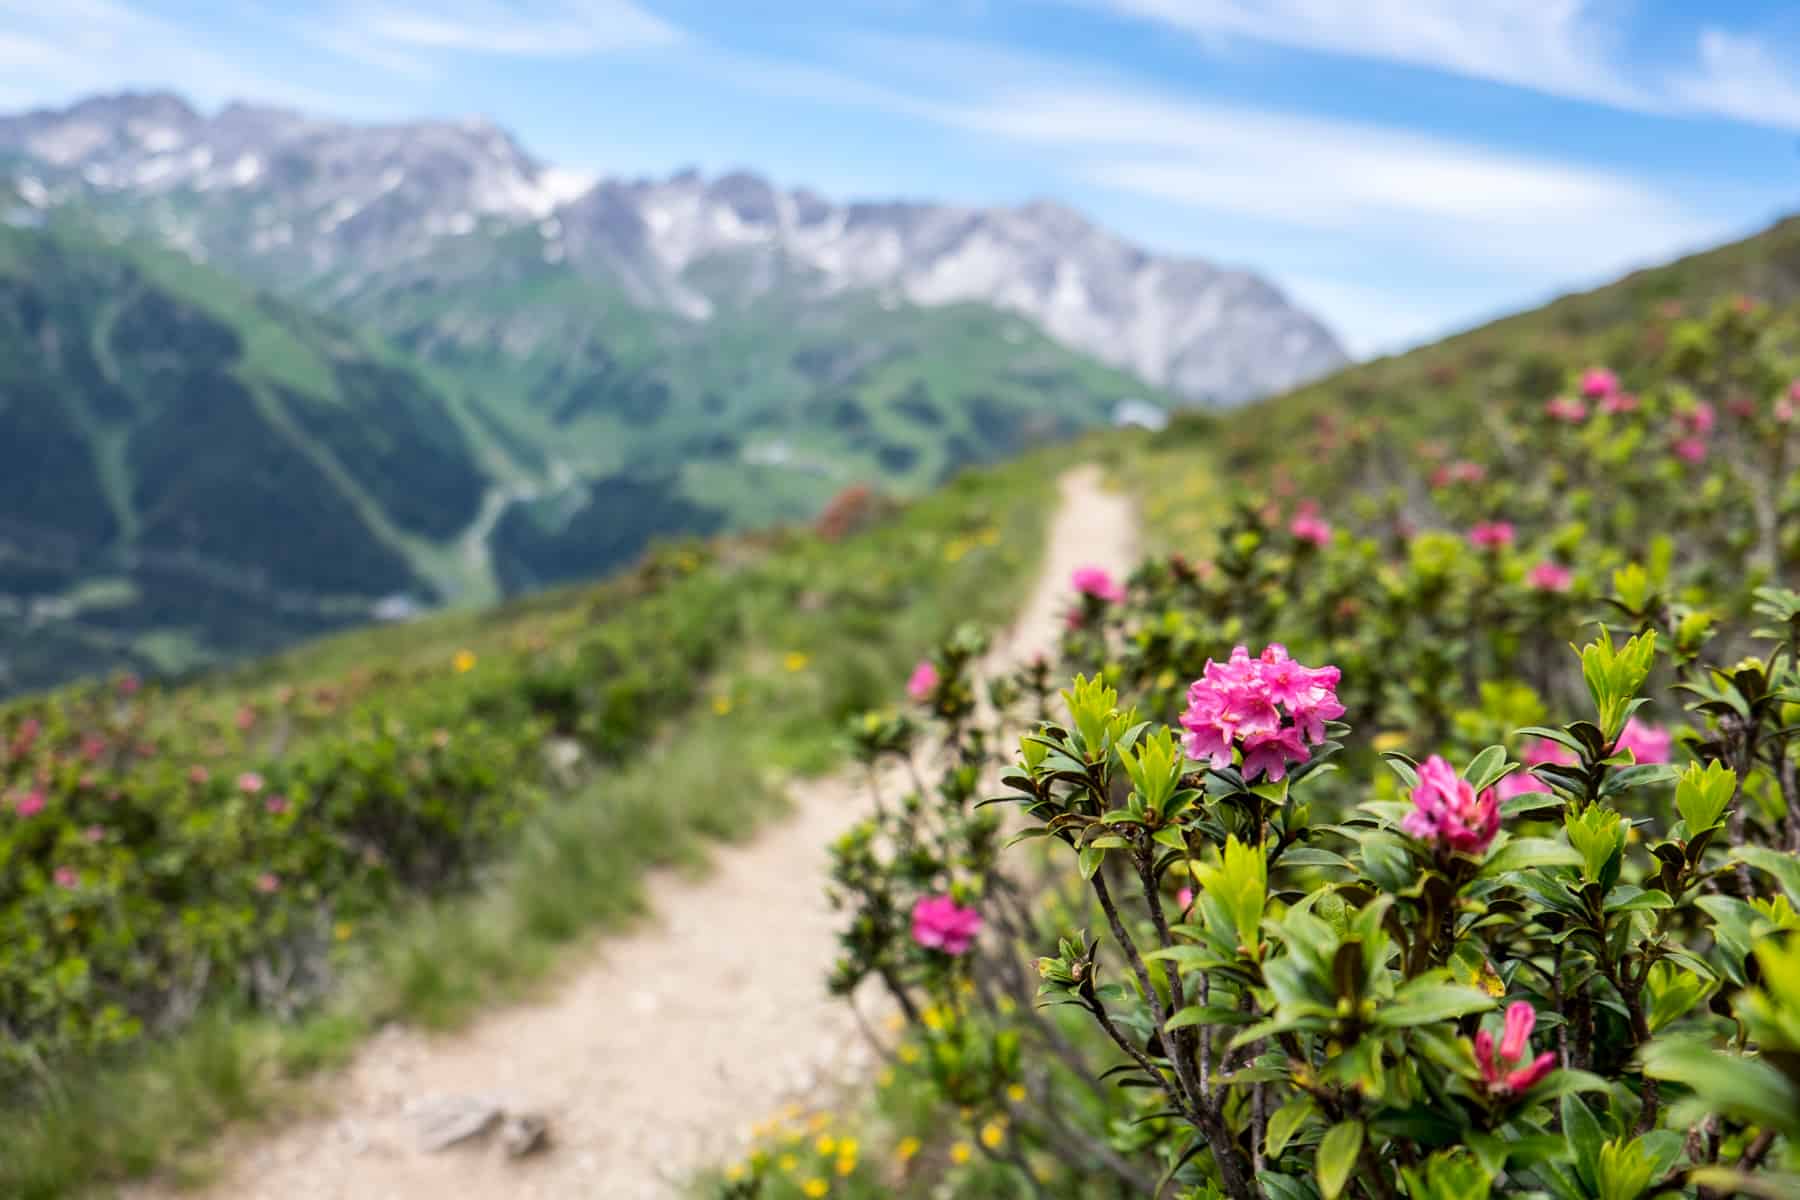 Fuschia pink Alpines roses that bloom in the summer in St Anton and which can be found on this hike path called the Alpenrosenweg